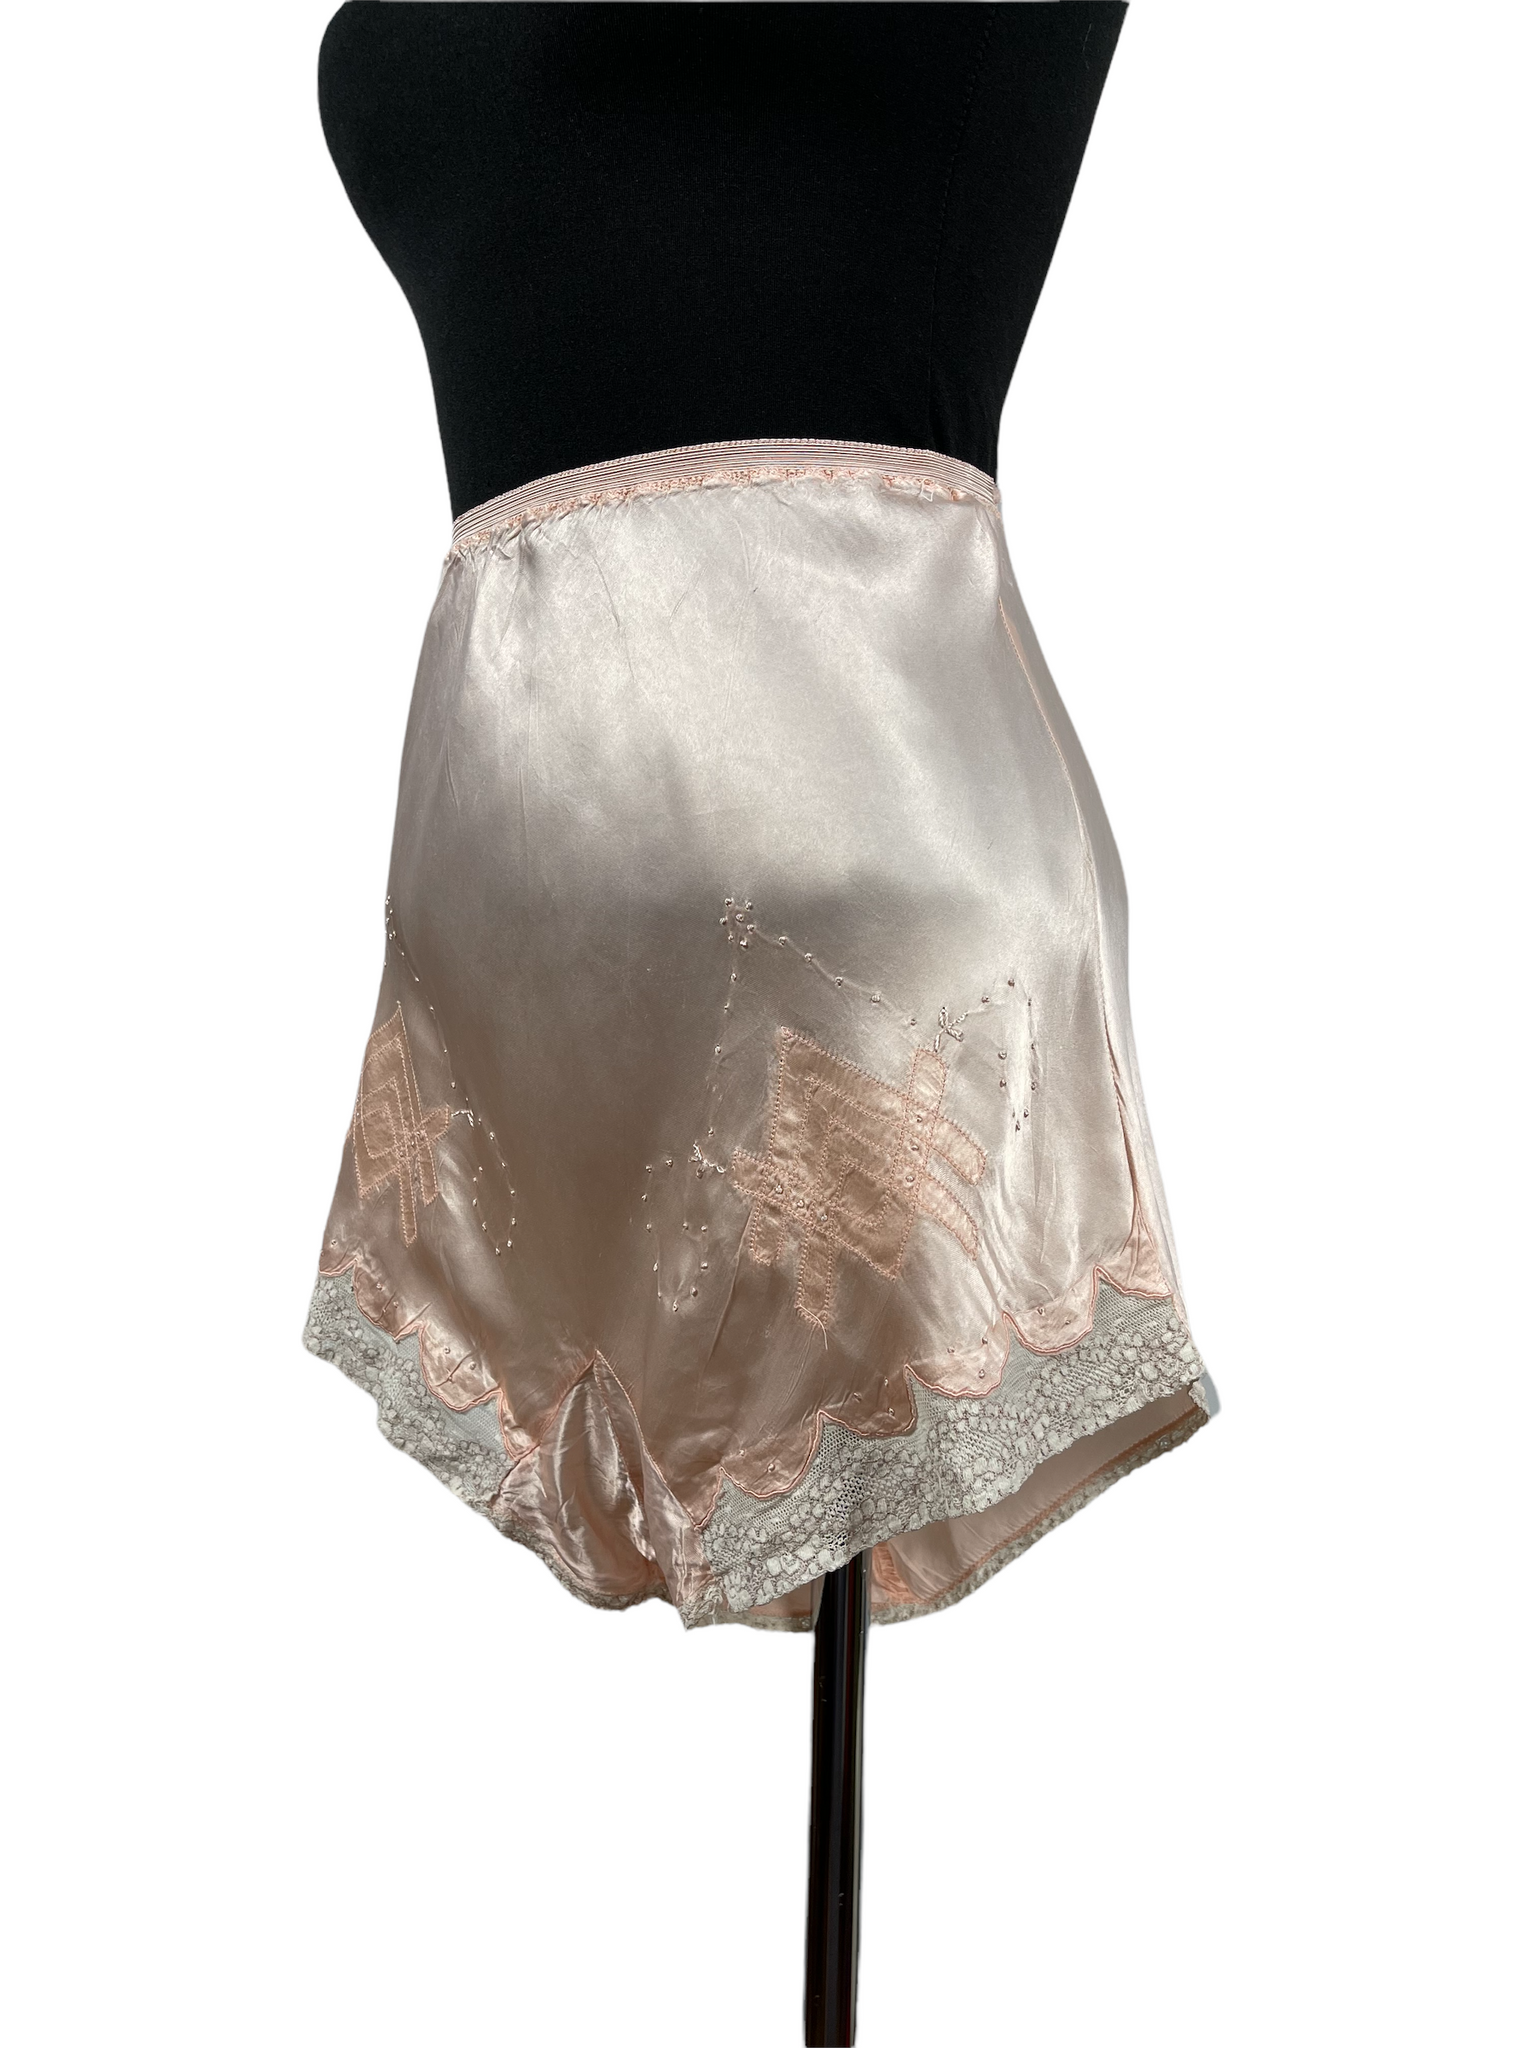 Original 1930's Palest Pink Satin French Knickers with Lace Trim - Vin –  1940s Style For You